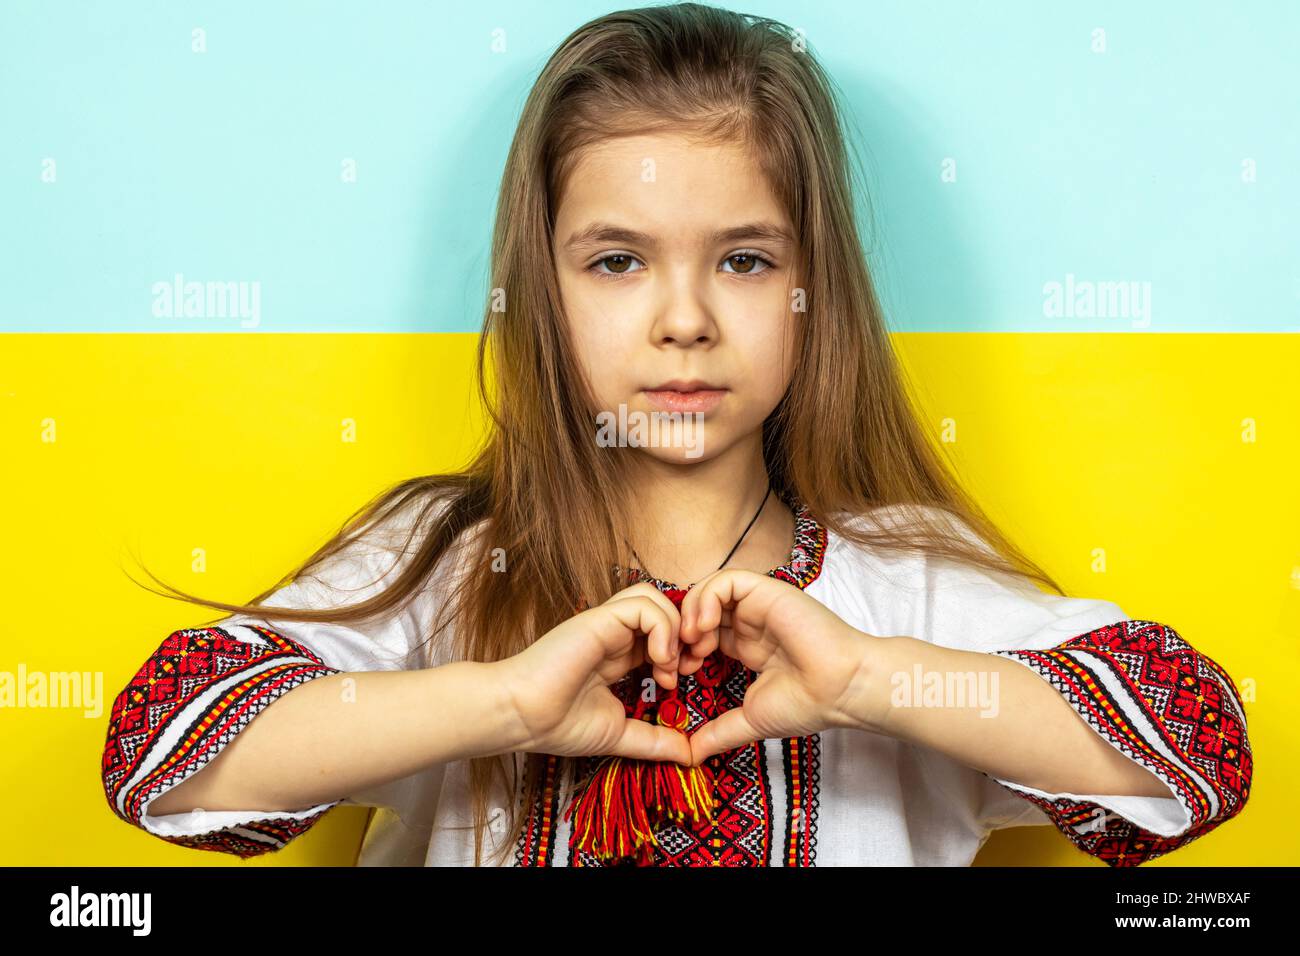 A girl in national Ukrainian clothes, an embroidered shirt, shows a heart sign as a sign of love for Ukraine, close-up against the background of the Stock Photo